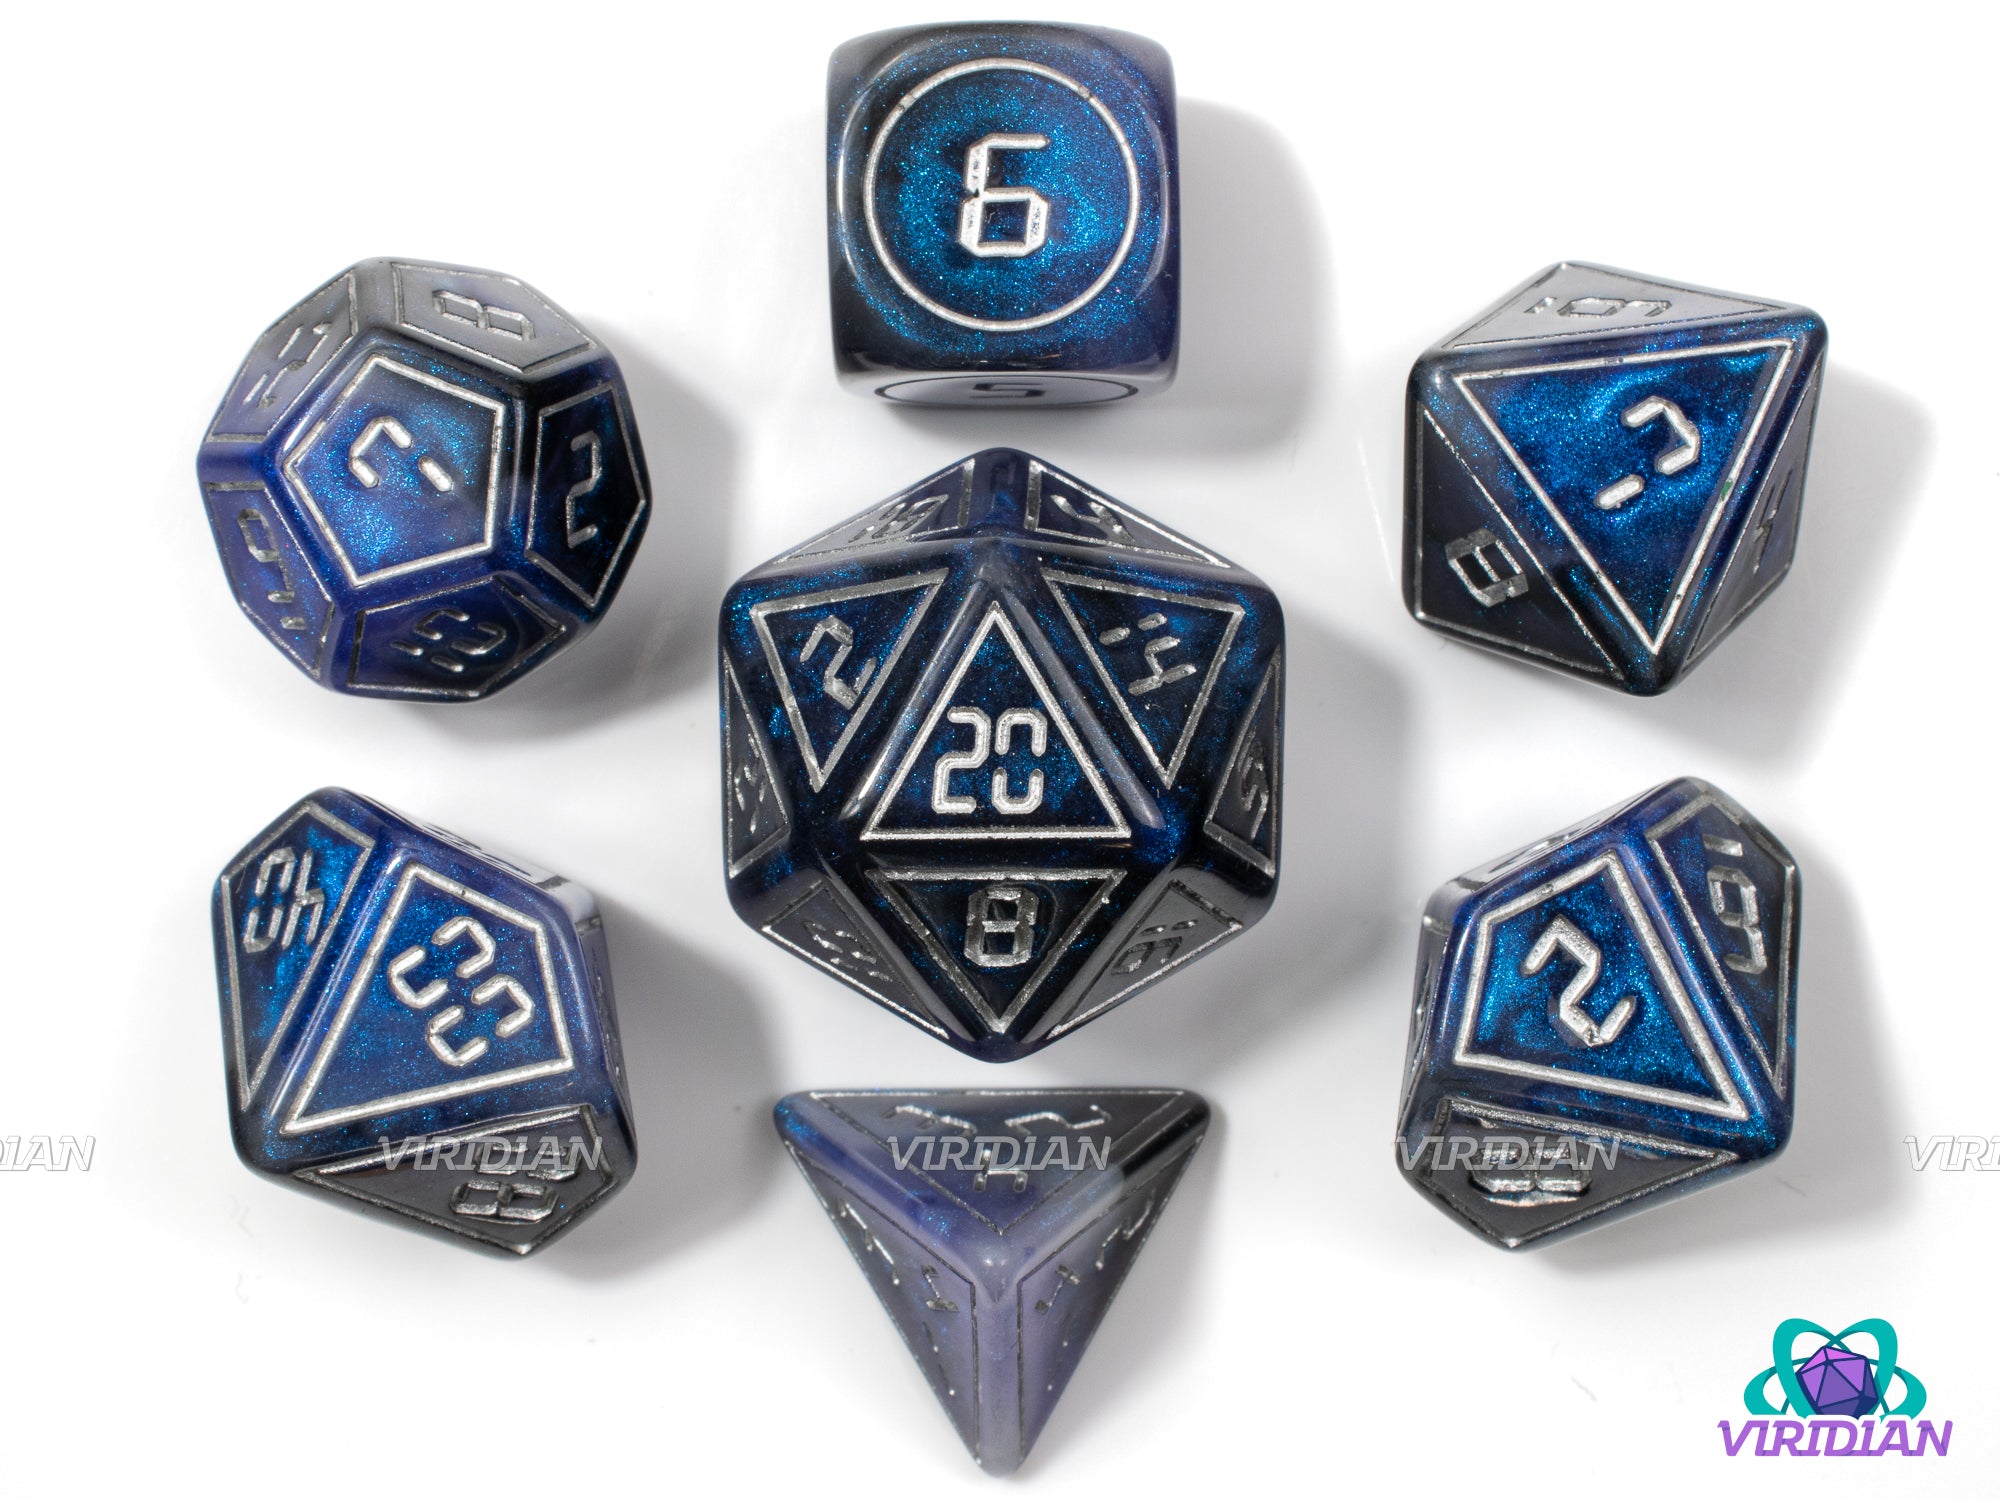 Intergalactic | Blue-Purple and Black, Glittery, Silver Digital Font w Accents | Resin Dice Set (7)